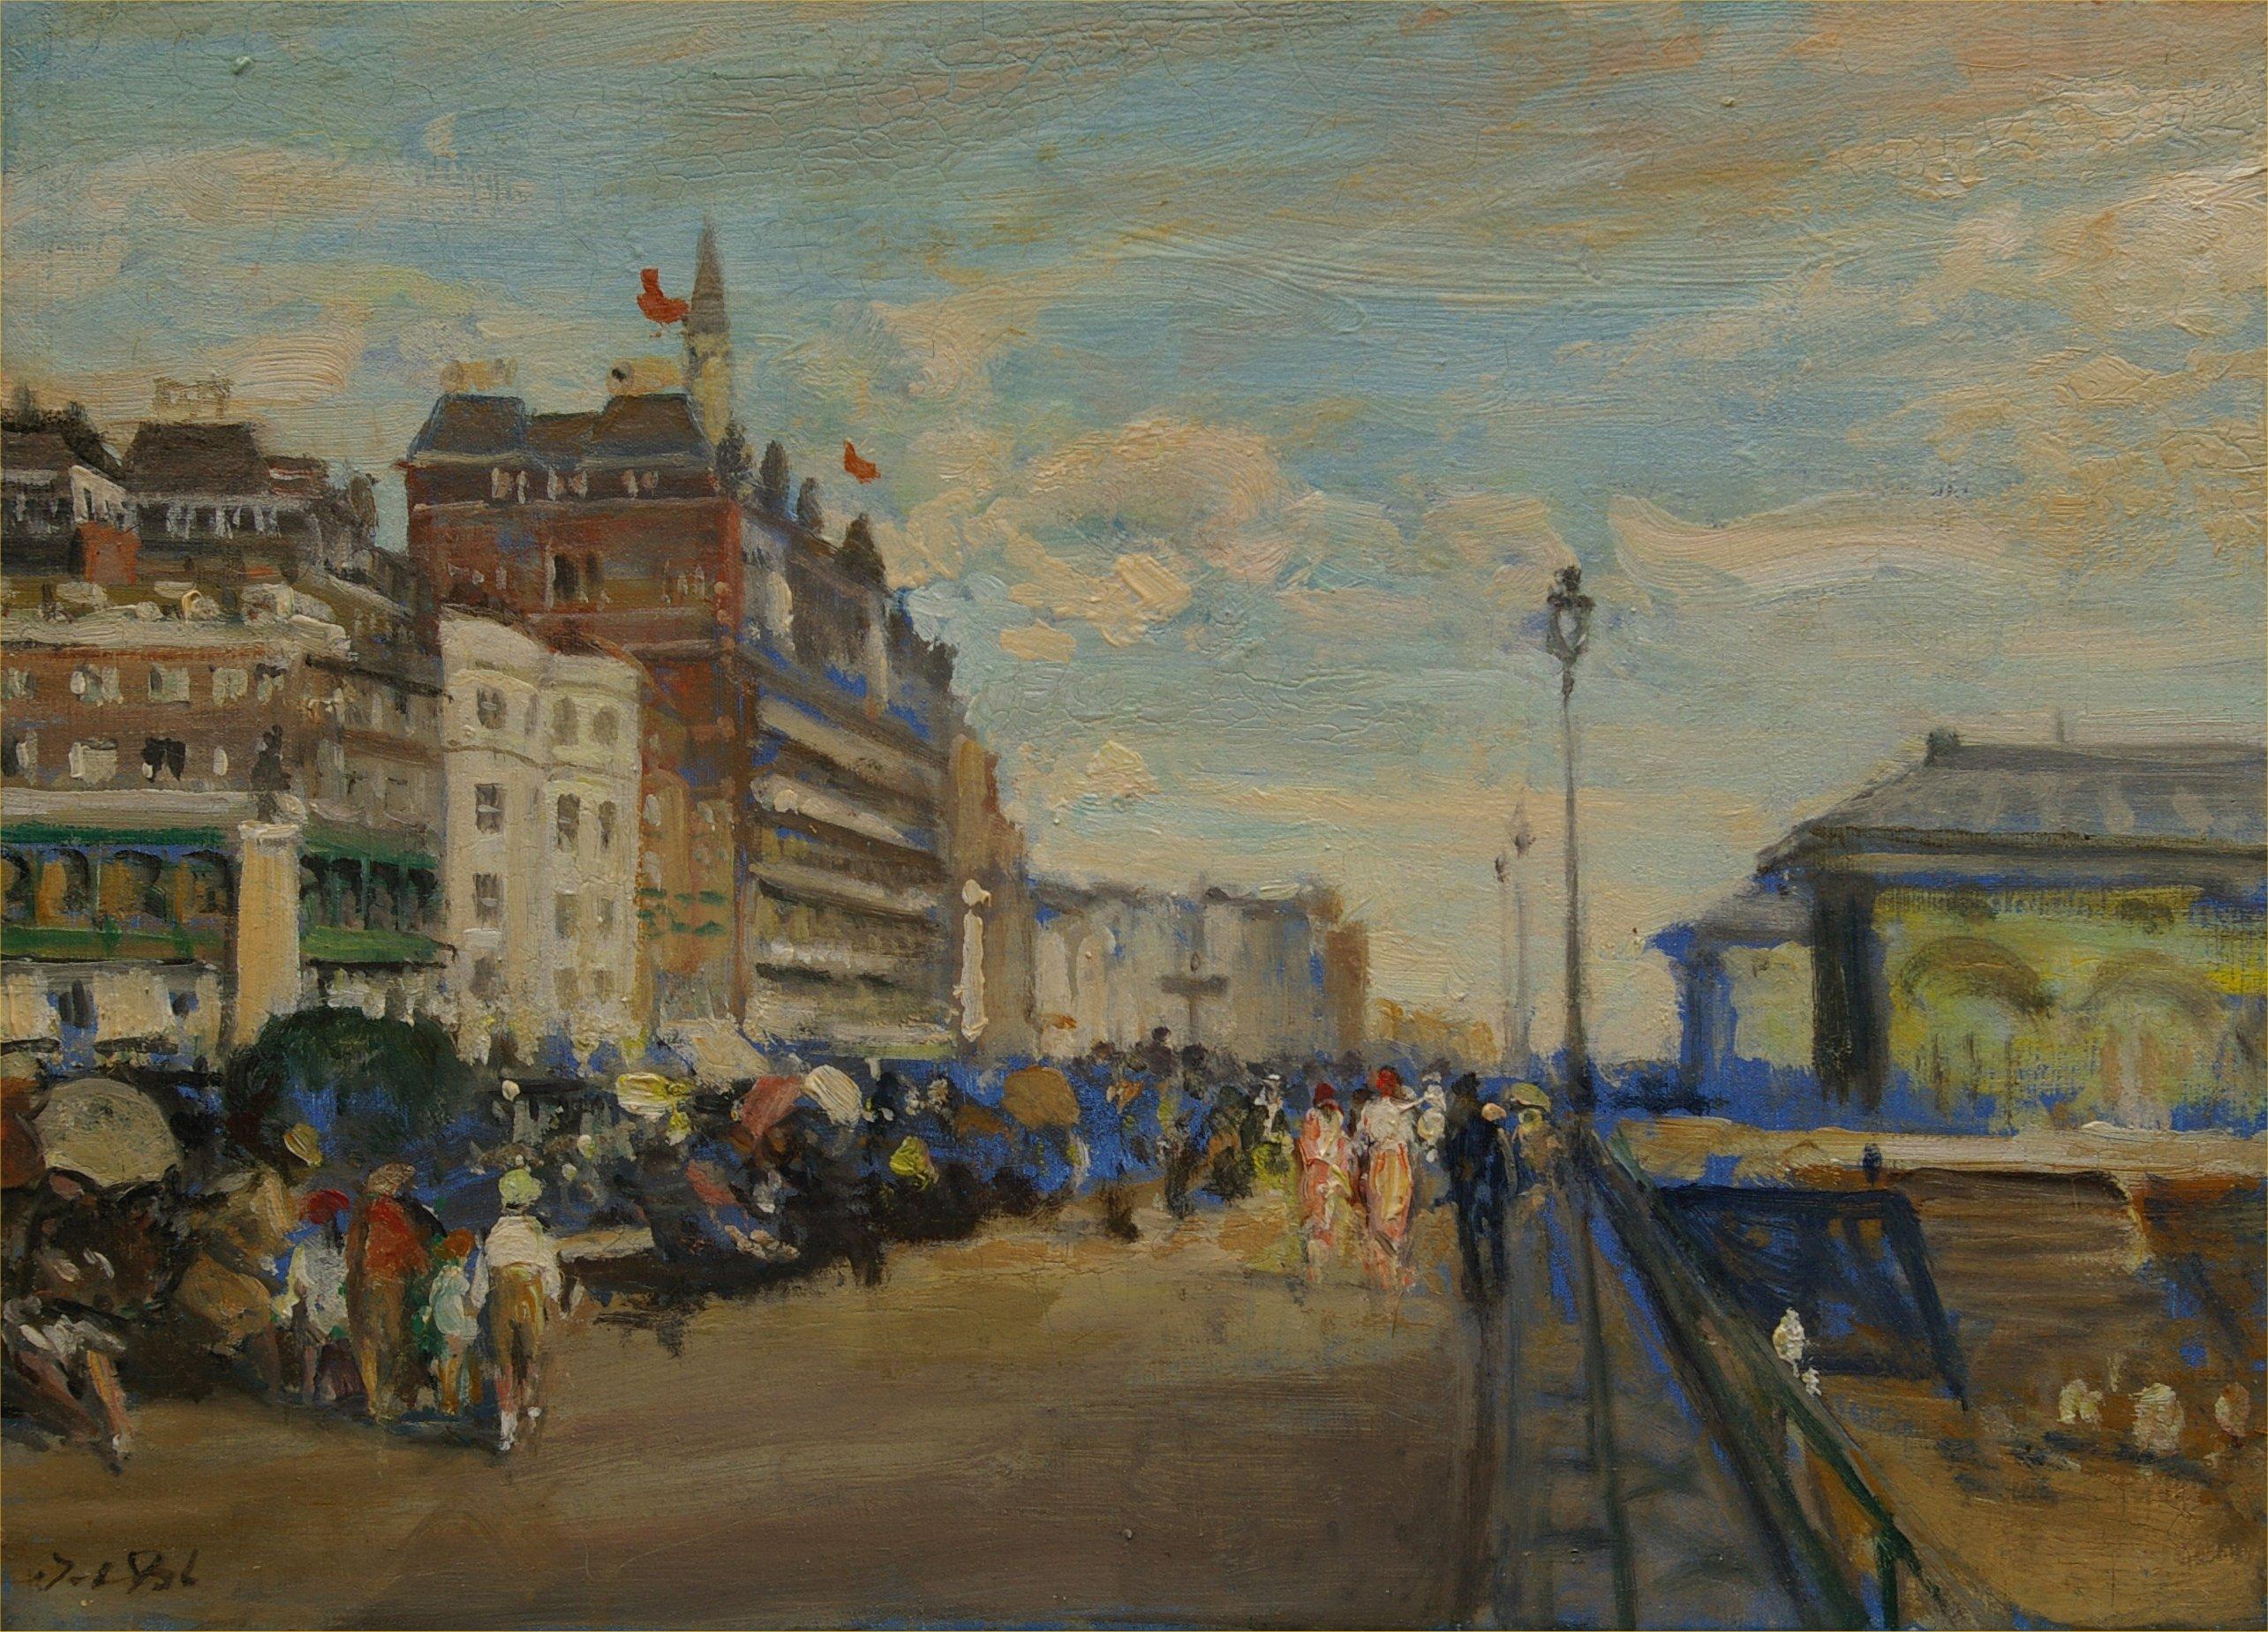 King's Road, Brighton - Painting by Jacques Emile Blanche